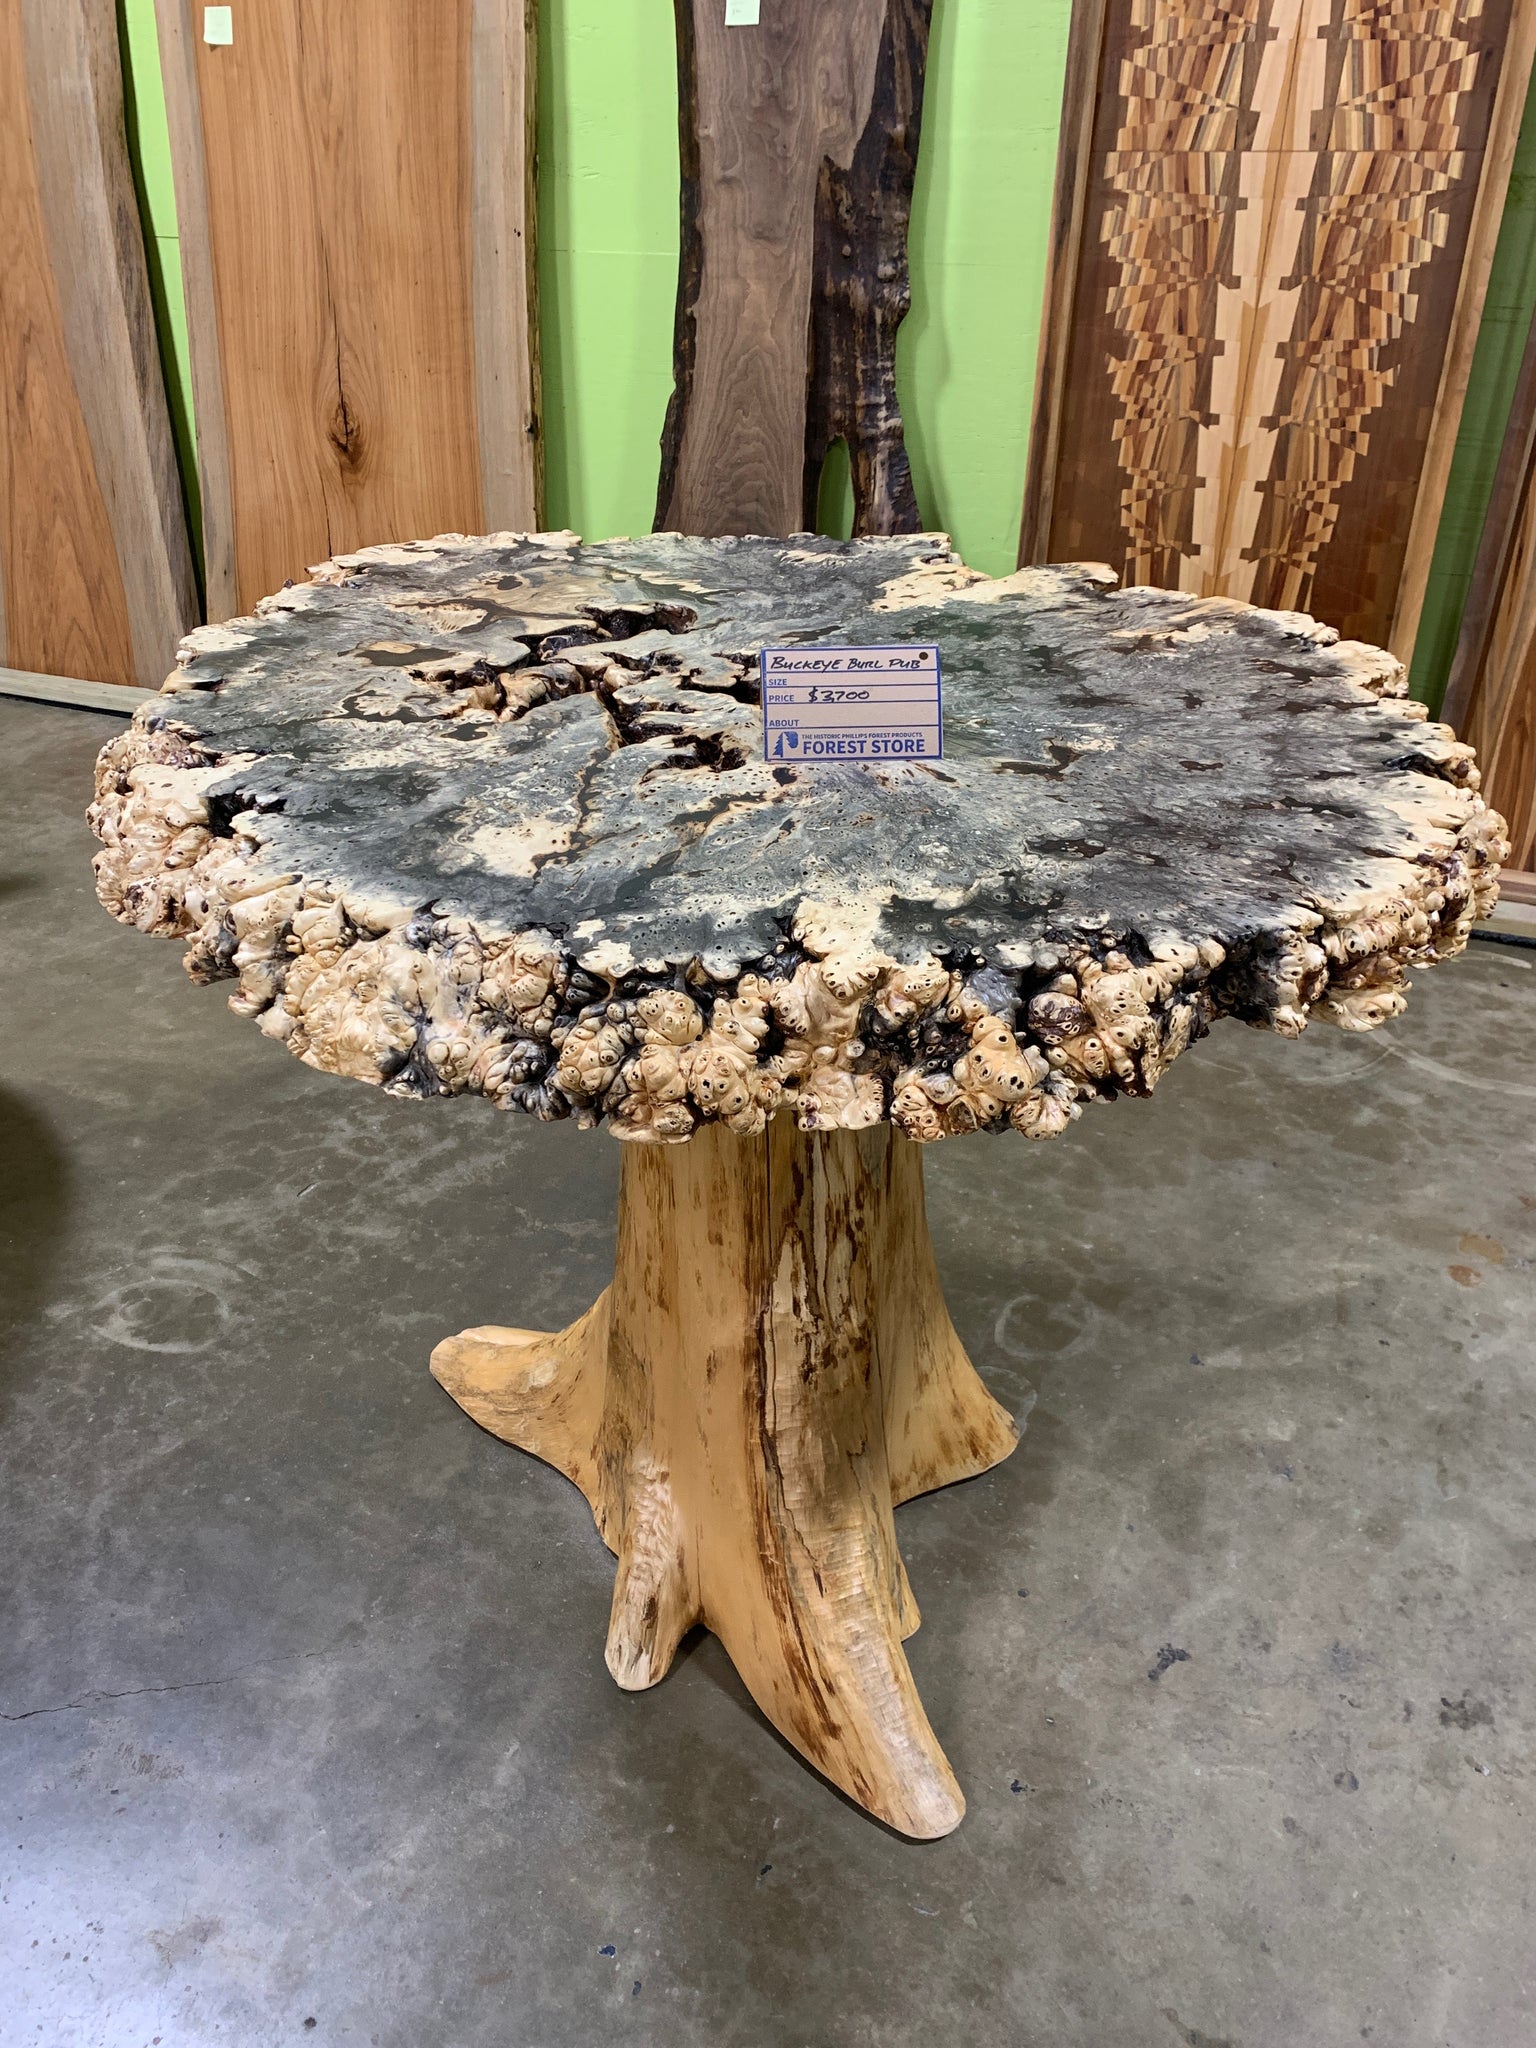 Live Edge Buckeye Burl Pub Table The Phillips Forest Store